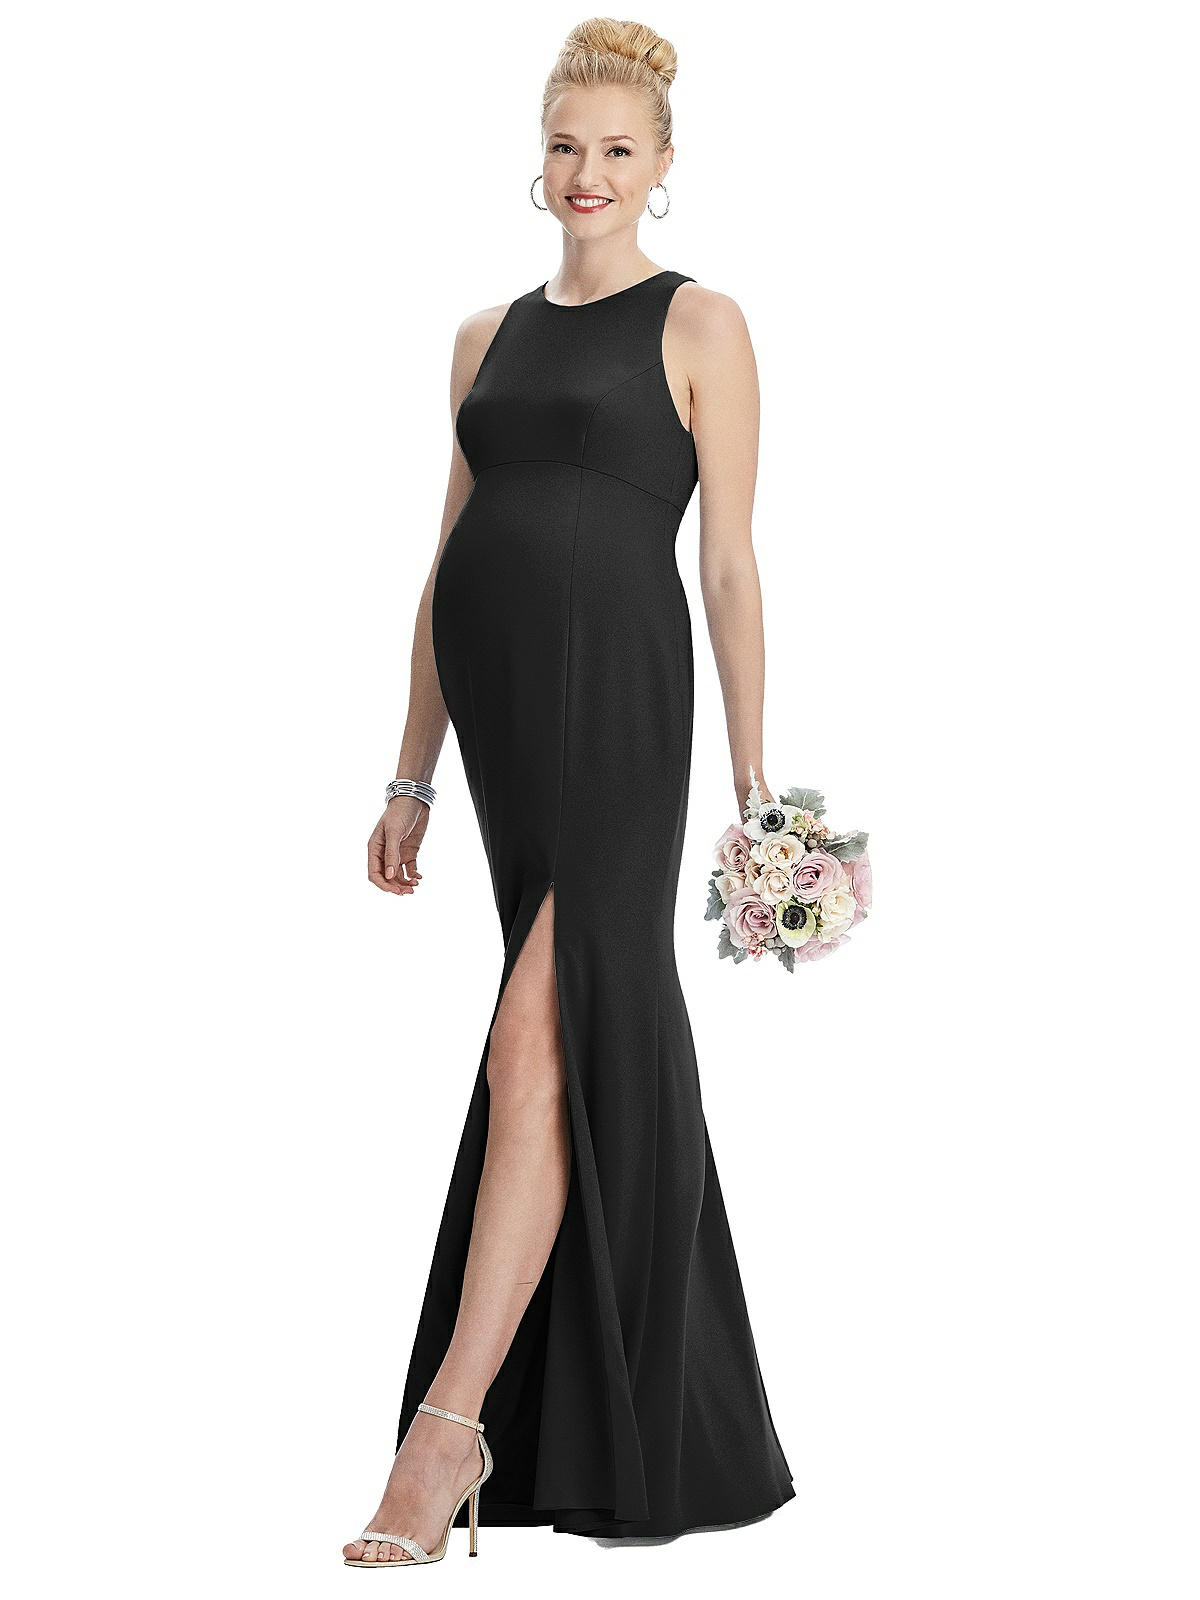 Sleeveless Halter Maternity Dress with Front Slit | The Dessy Group